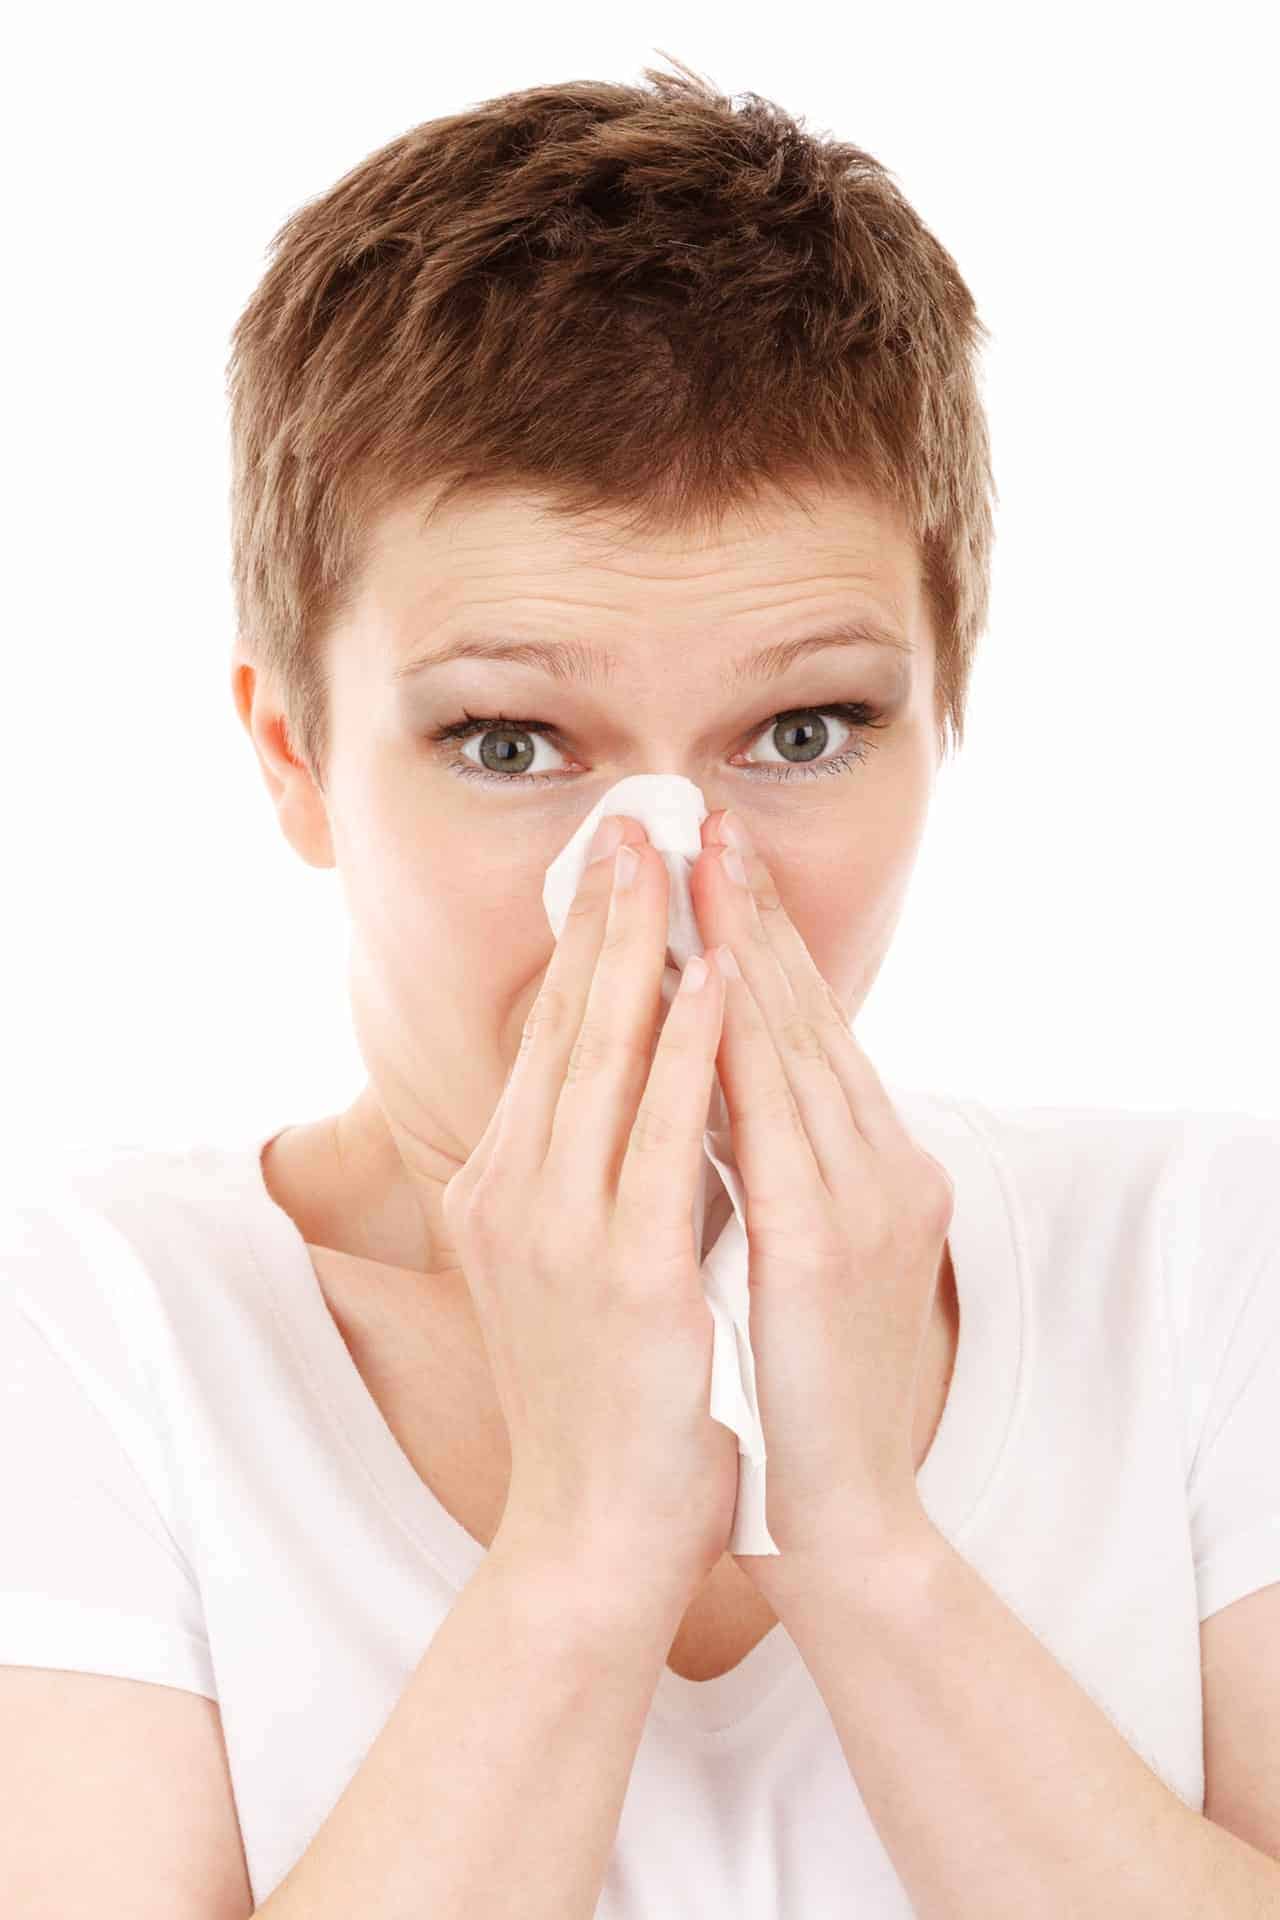 10 Quick Home Remedies For Cold And Cough Relief